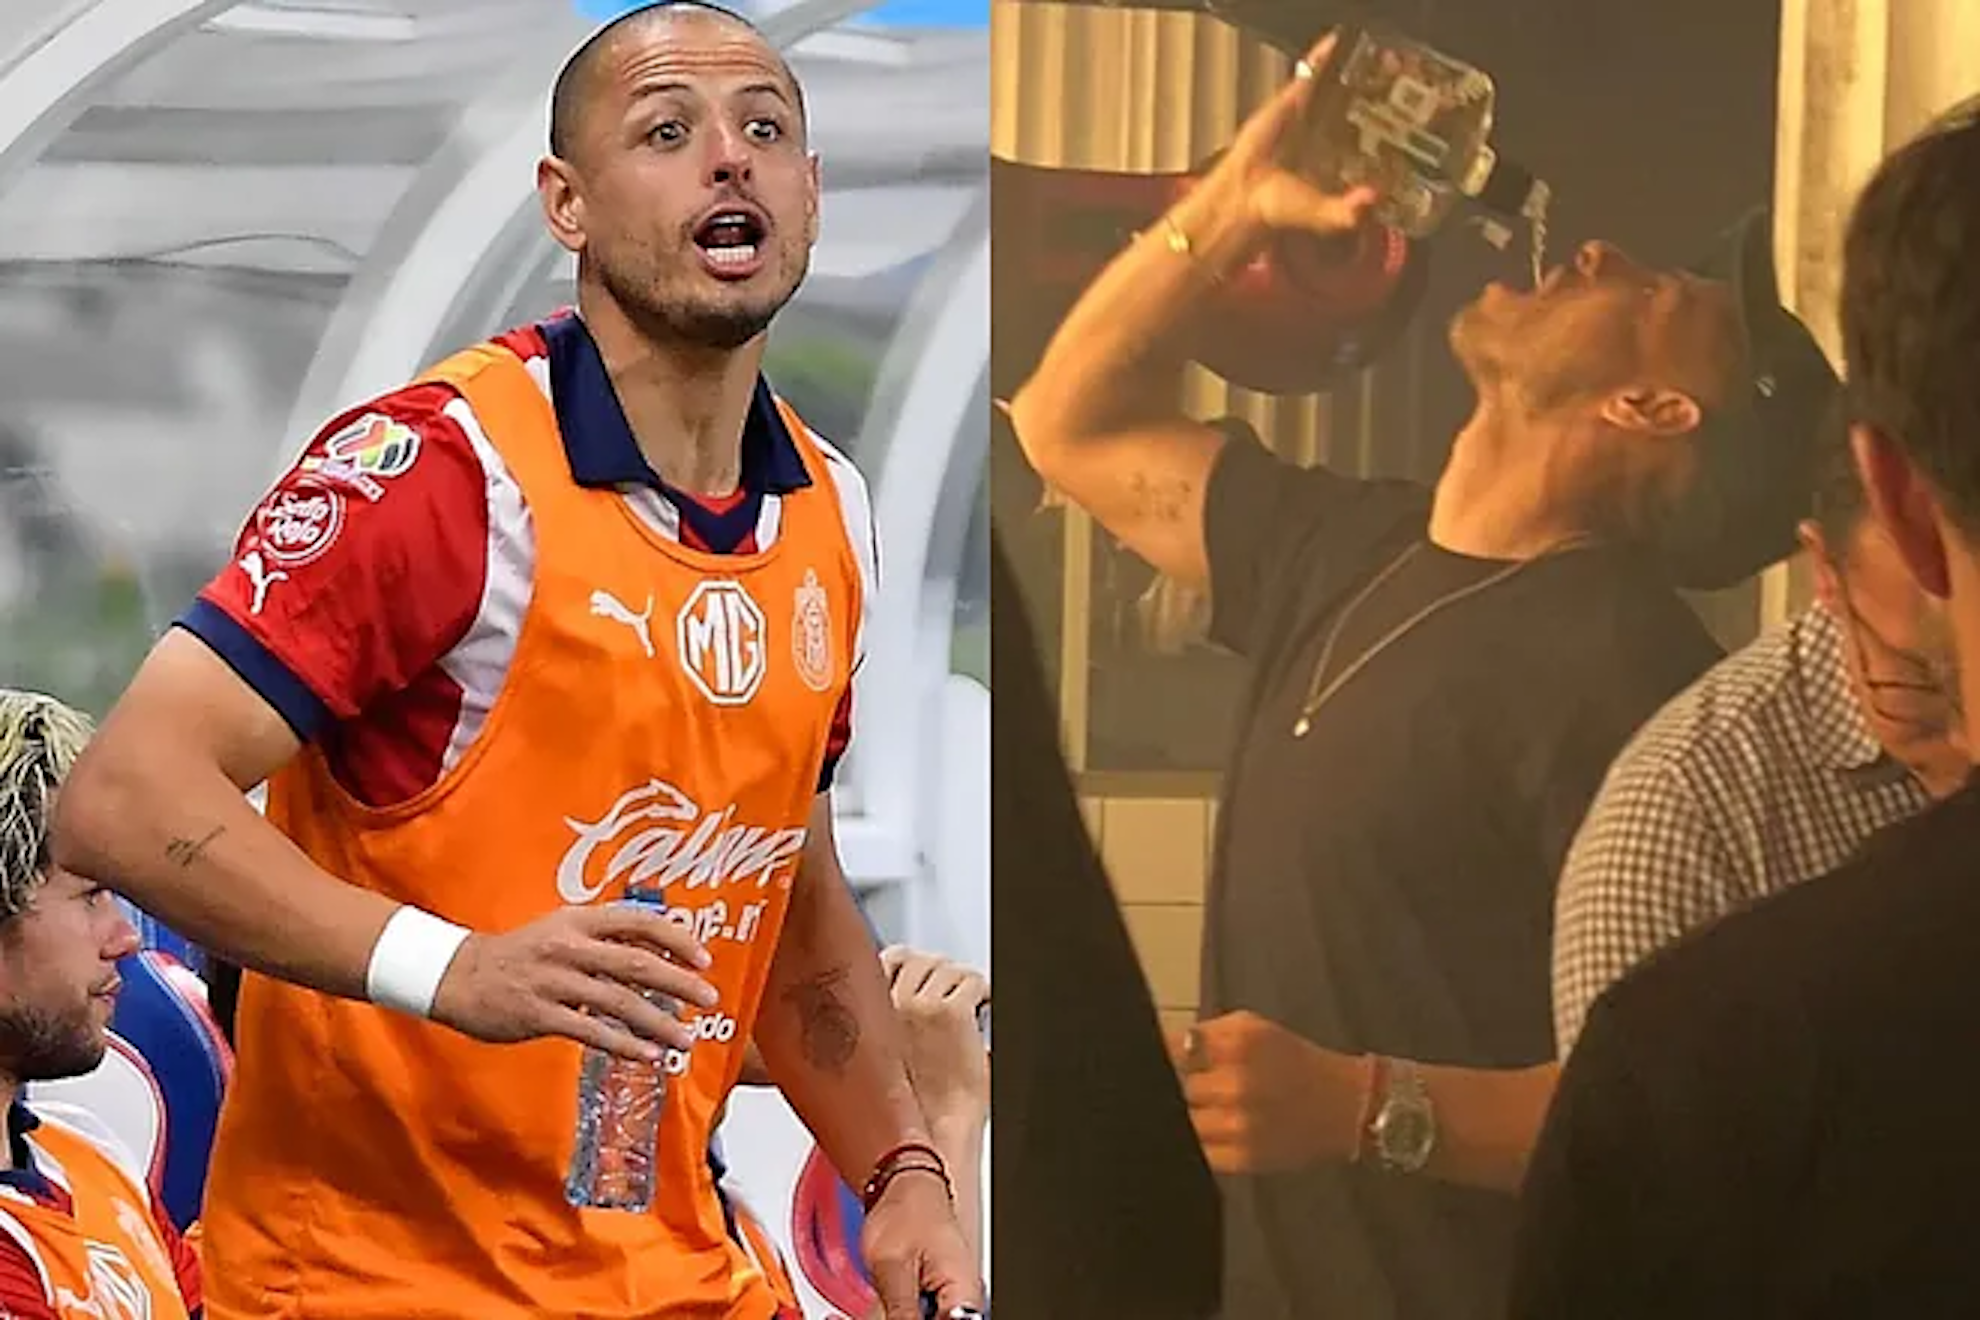 New photos of ex-Manchester United striker Chicharito at a party cause controversy on social media